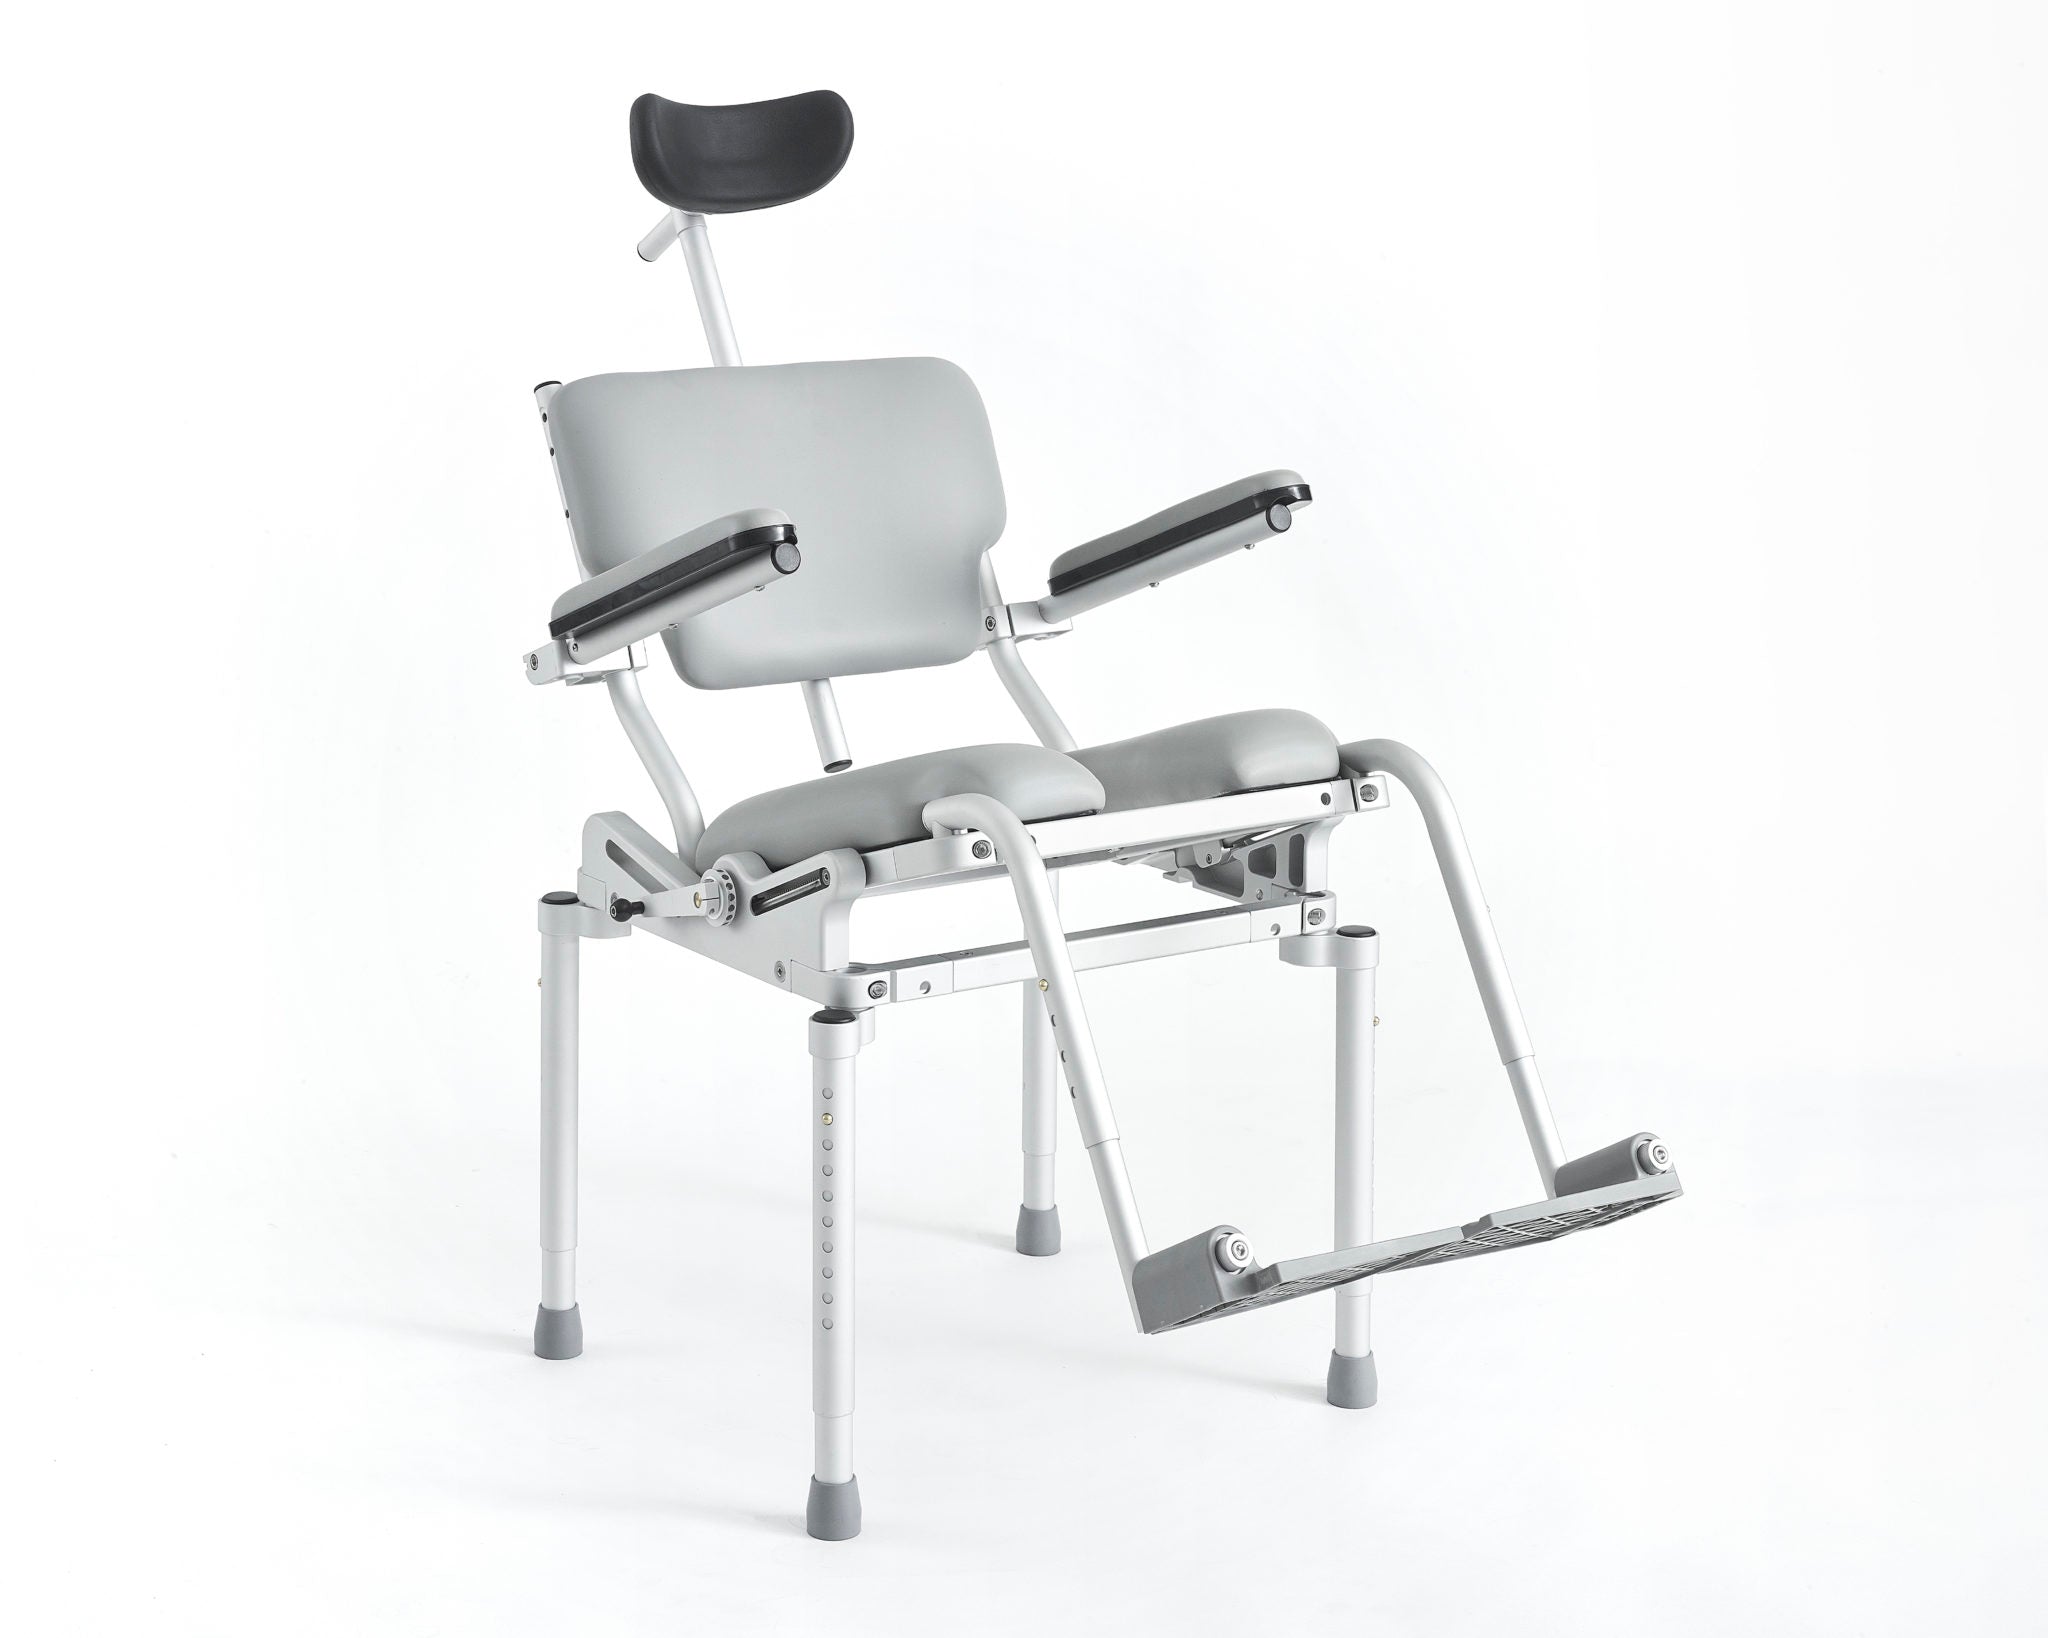 NuProdx MC3200 Tilt - Tub and Commode Stationary Chair